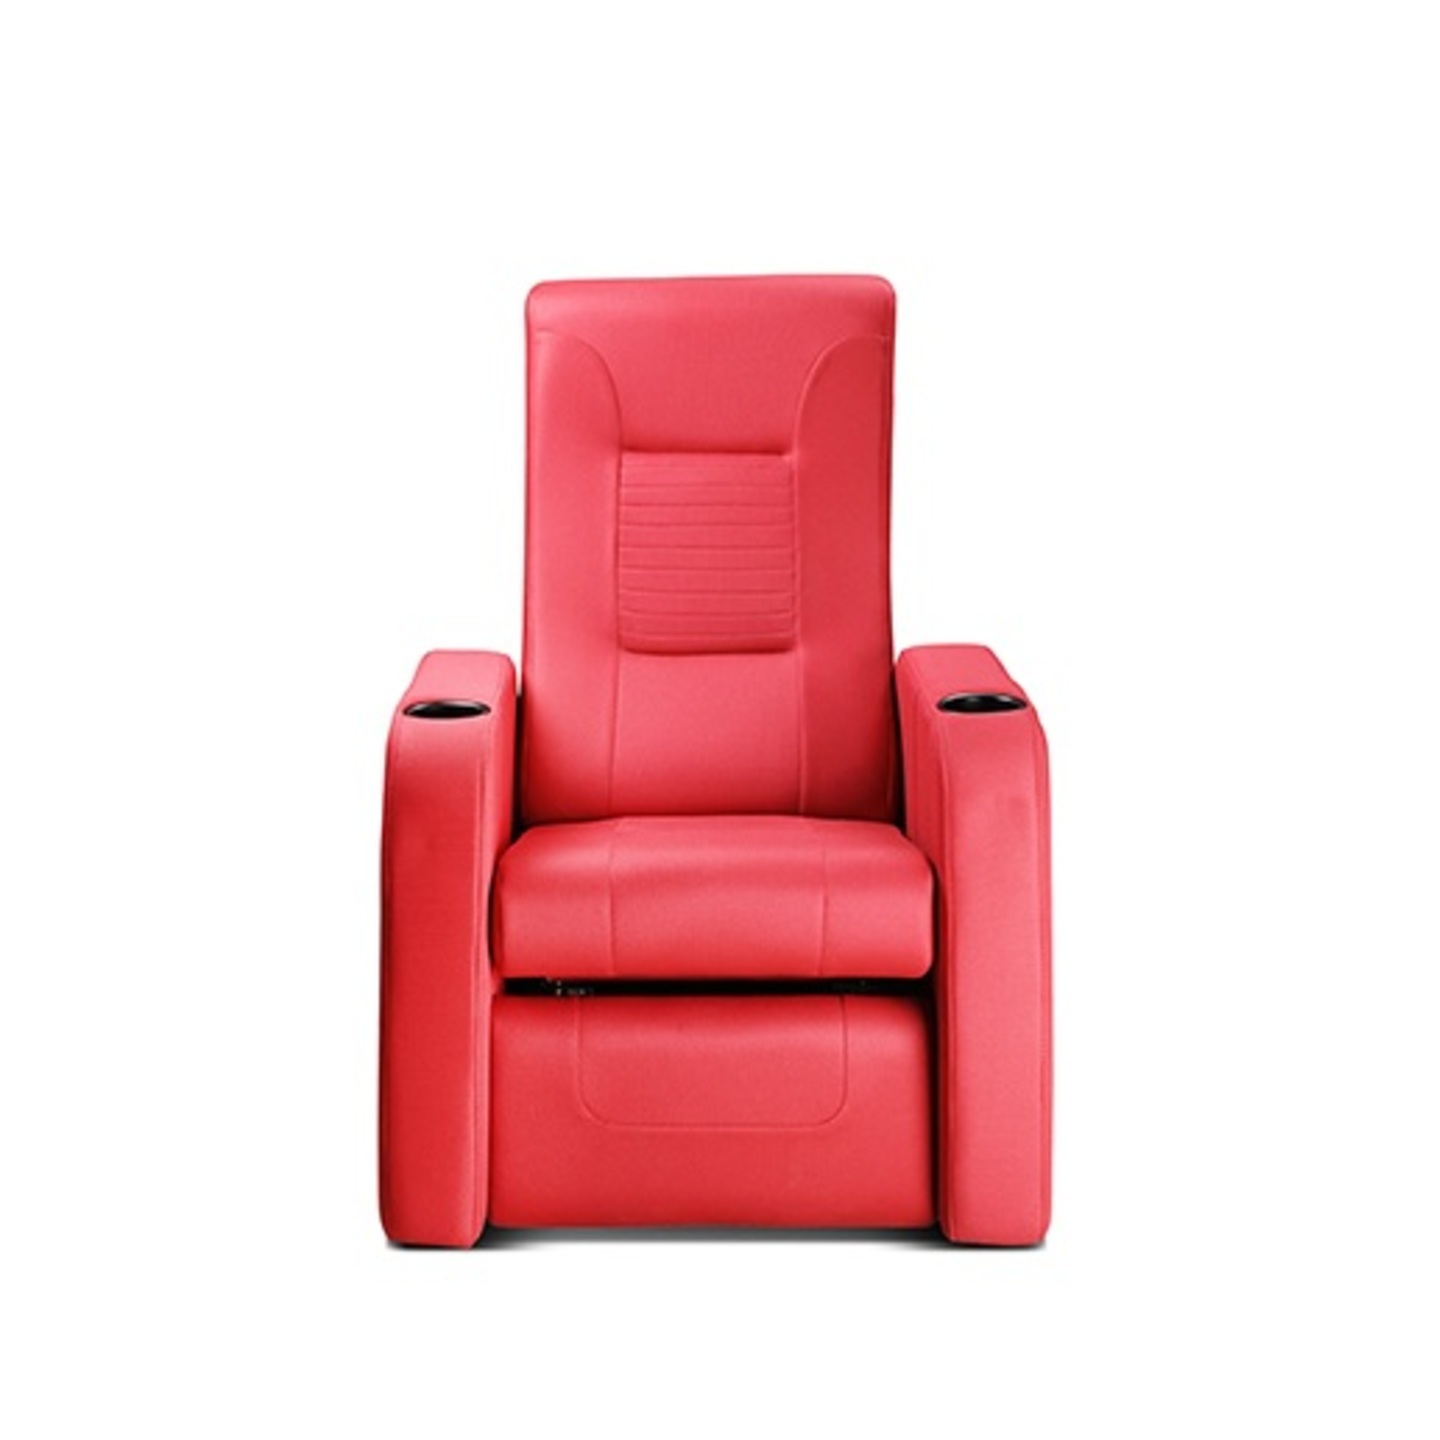 LN Recliner Chair Brio Manual System In Red Colour